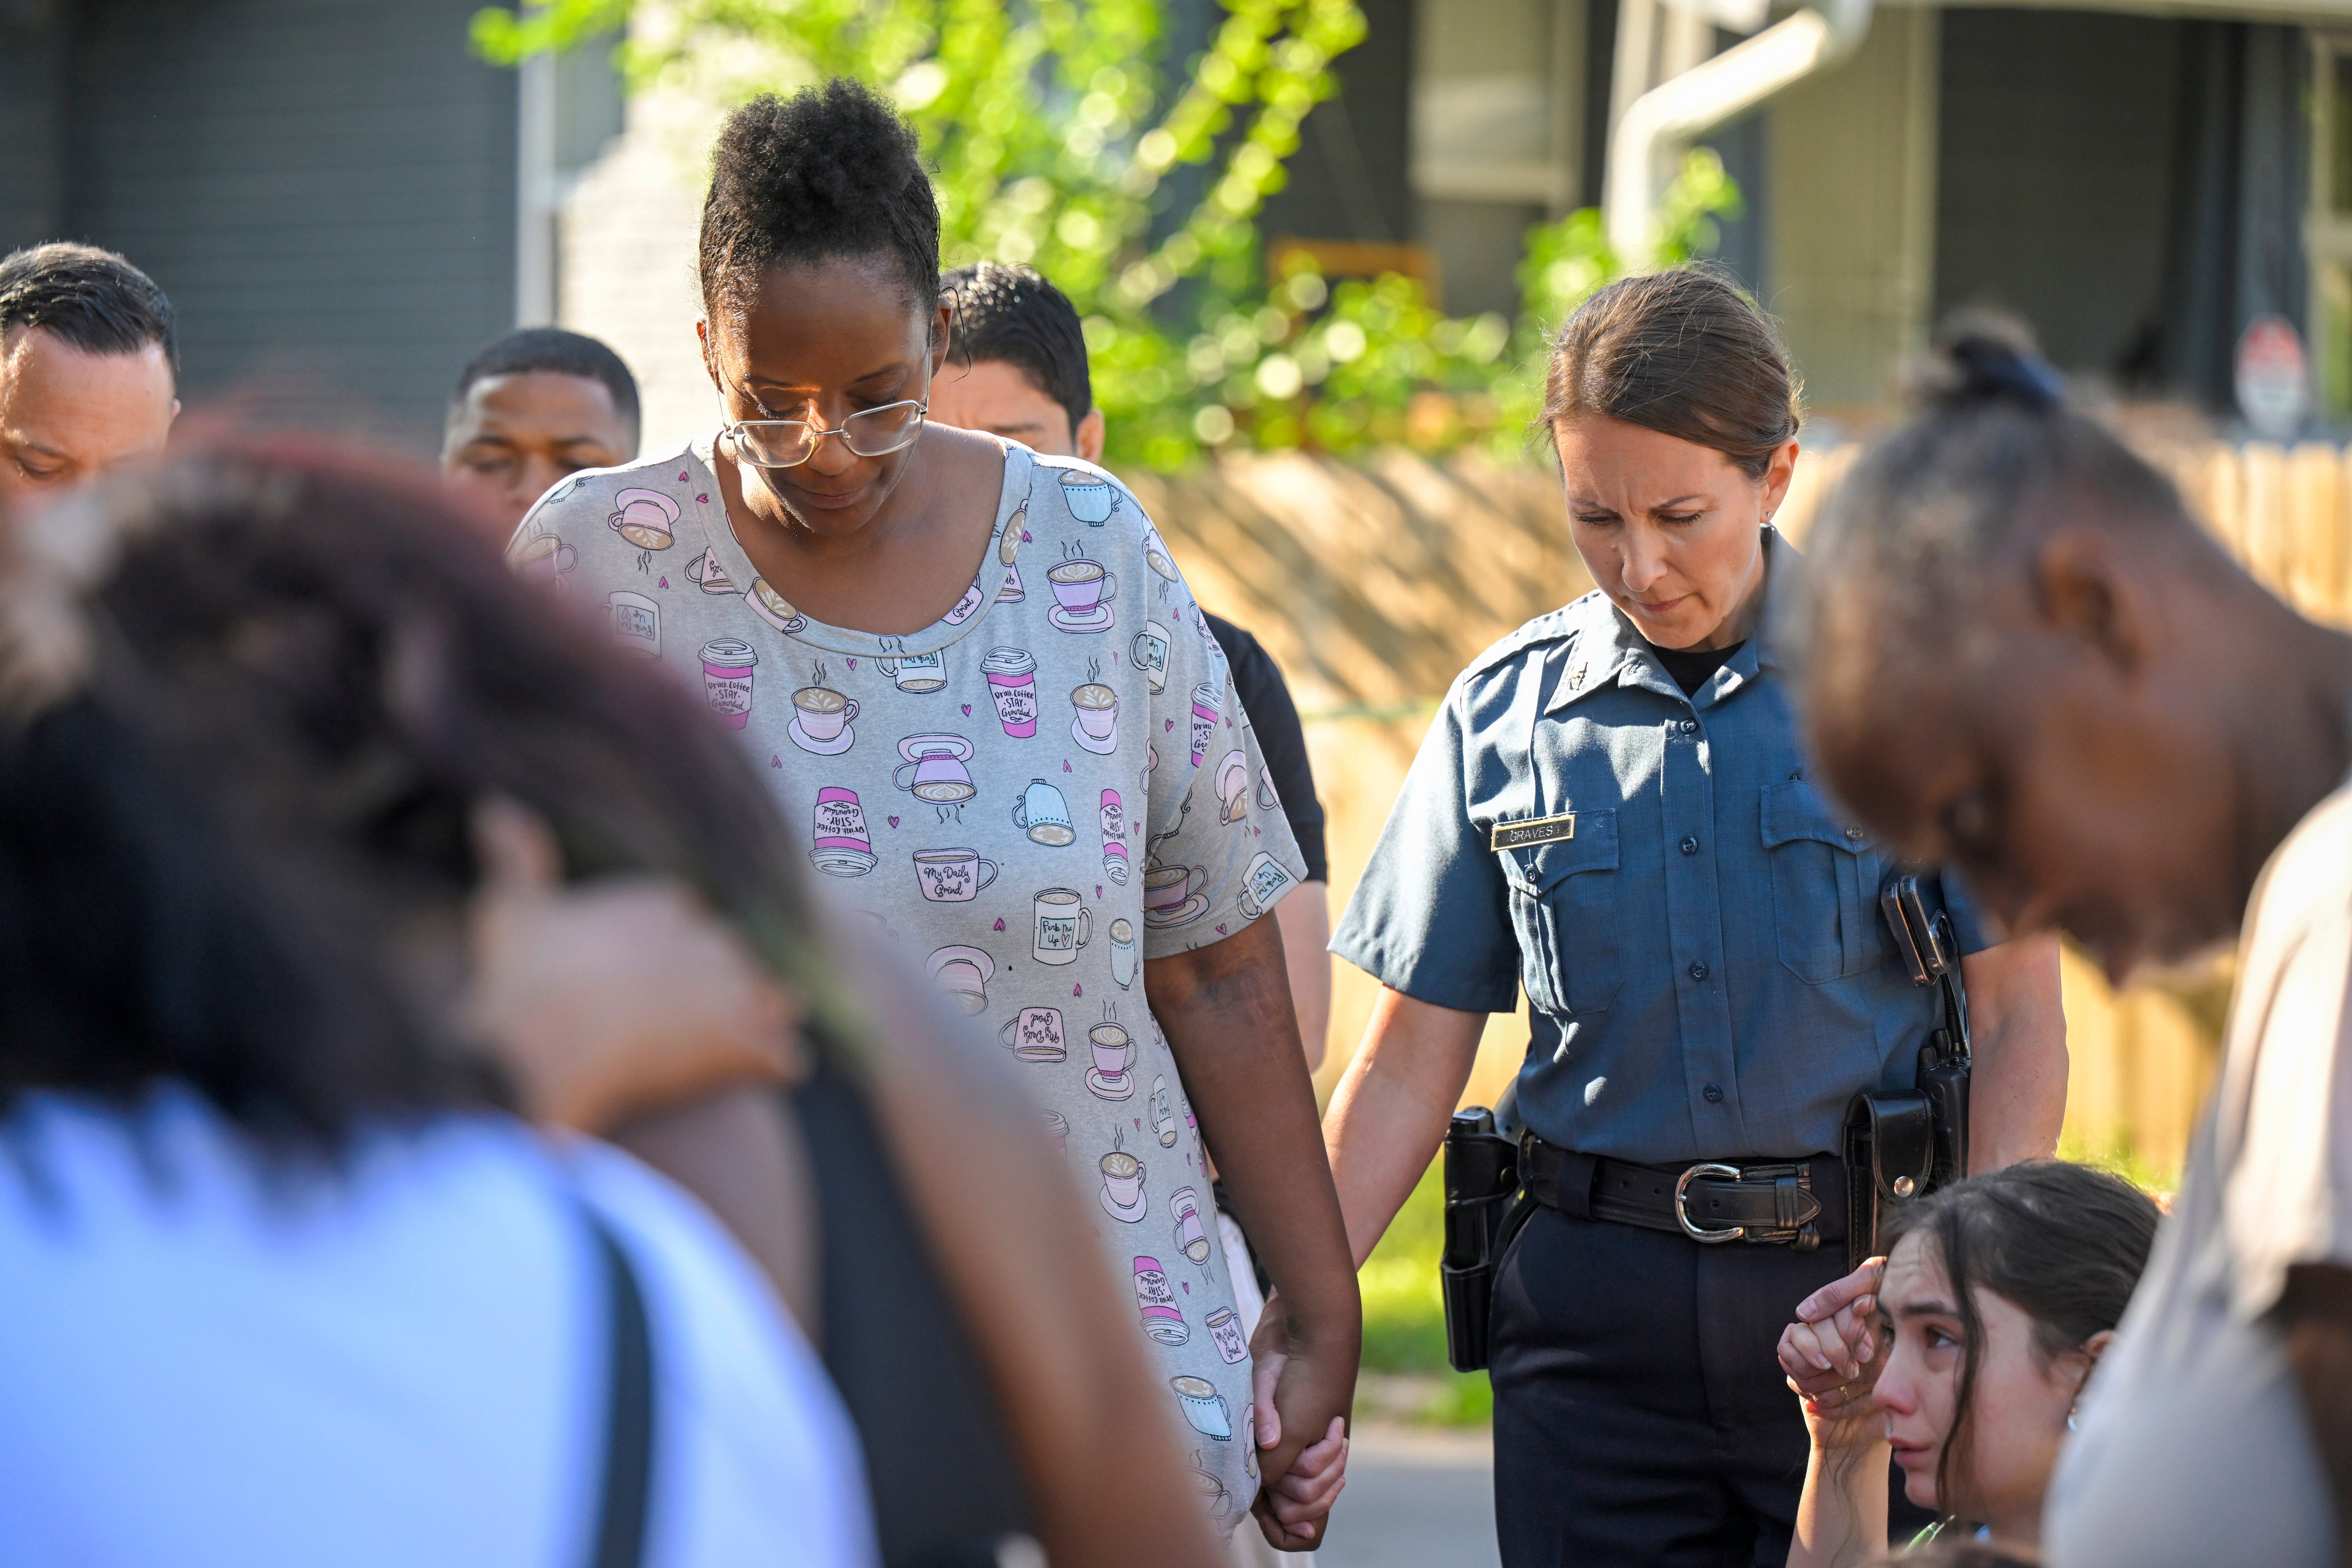 Kansas City Police Department chief Stavey Graves visits the scene of a mass shooting that left three people dead and injured five others on 25 June